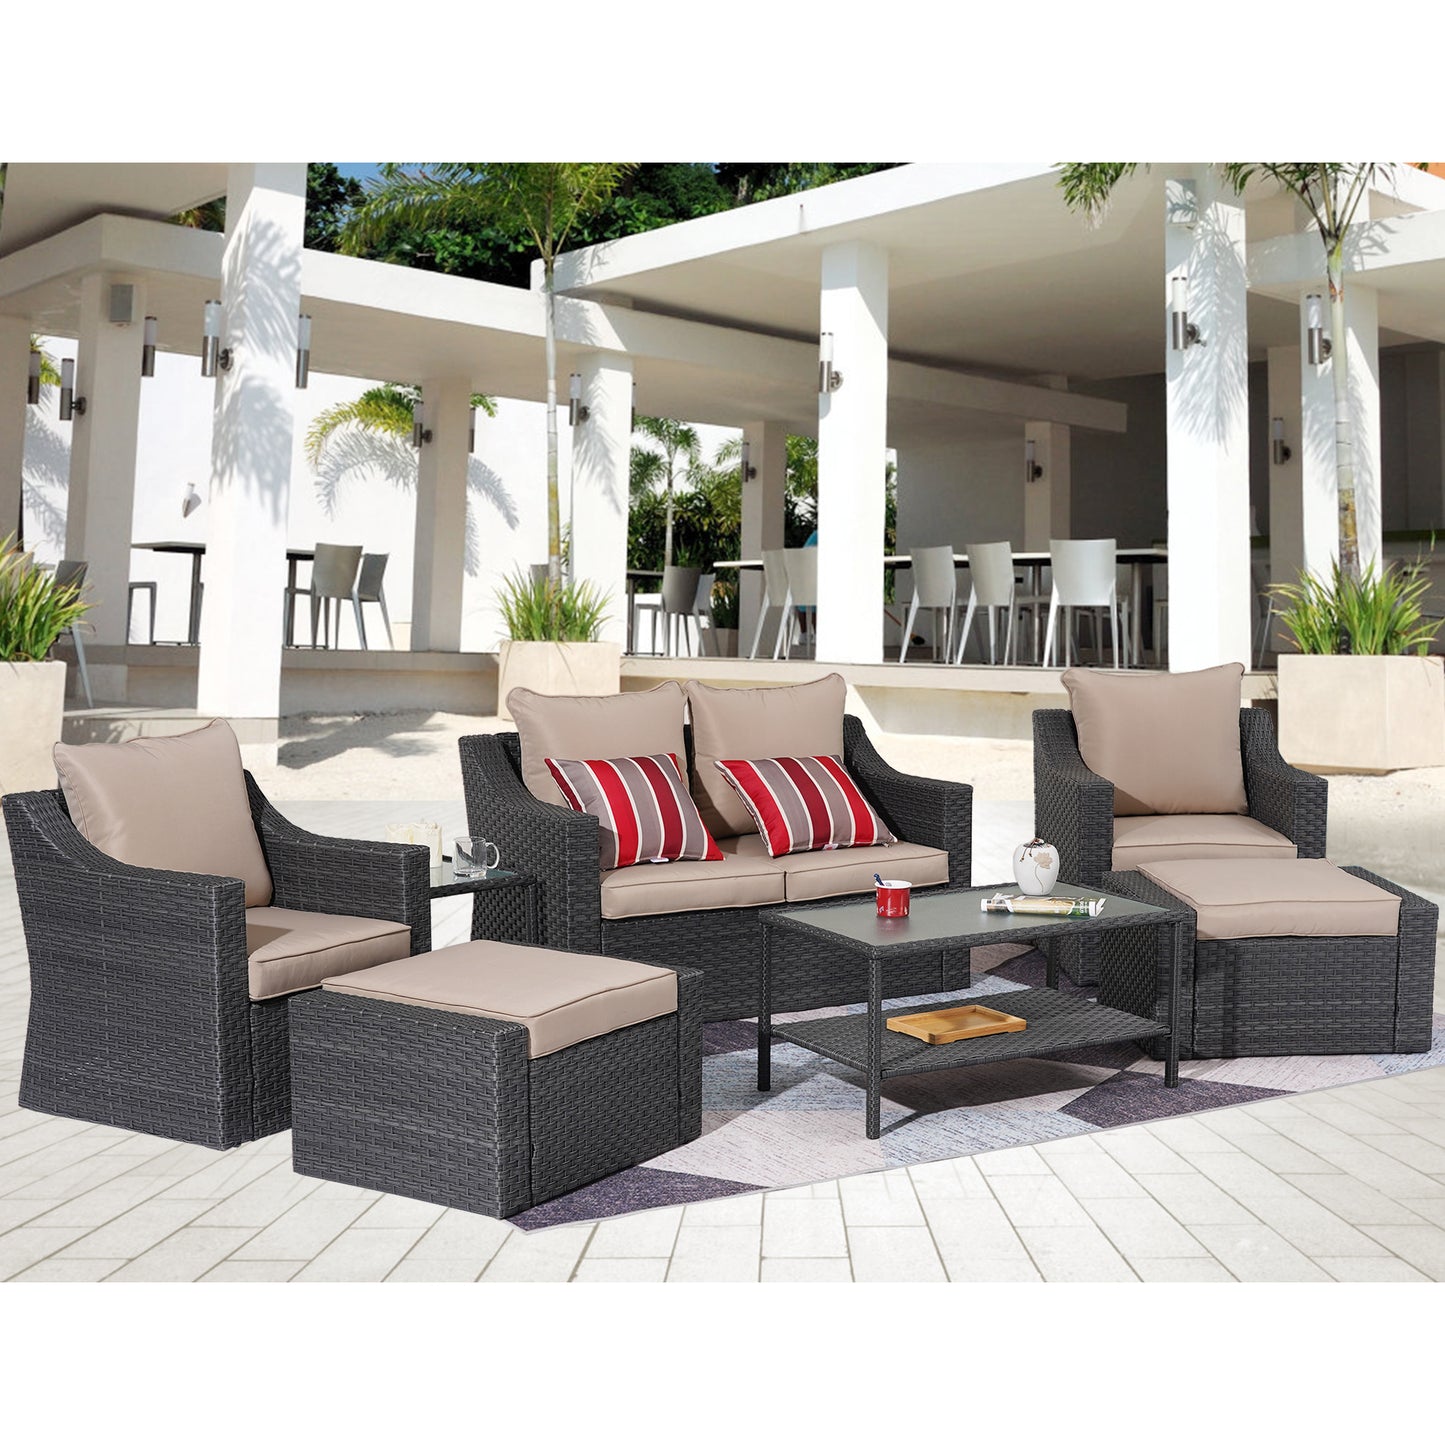 Outdoor Patio Sectional Furniture Set, 7 Piece PE Wicker Patio Conversation Sets Couch with Washable Cushions & Glass Table, Outdoor Rattan Sofa for Garden, Lawn, Backyard (Khaki)